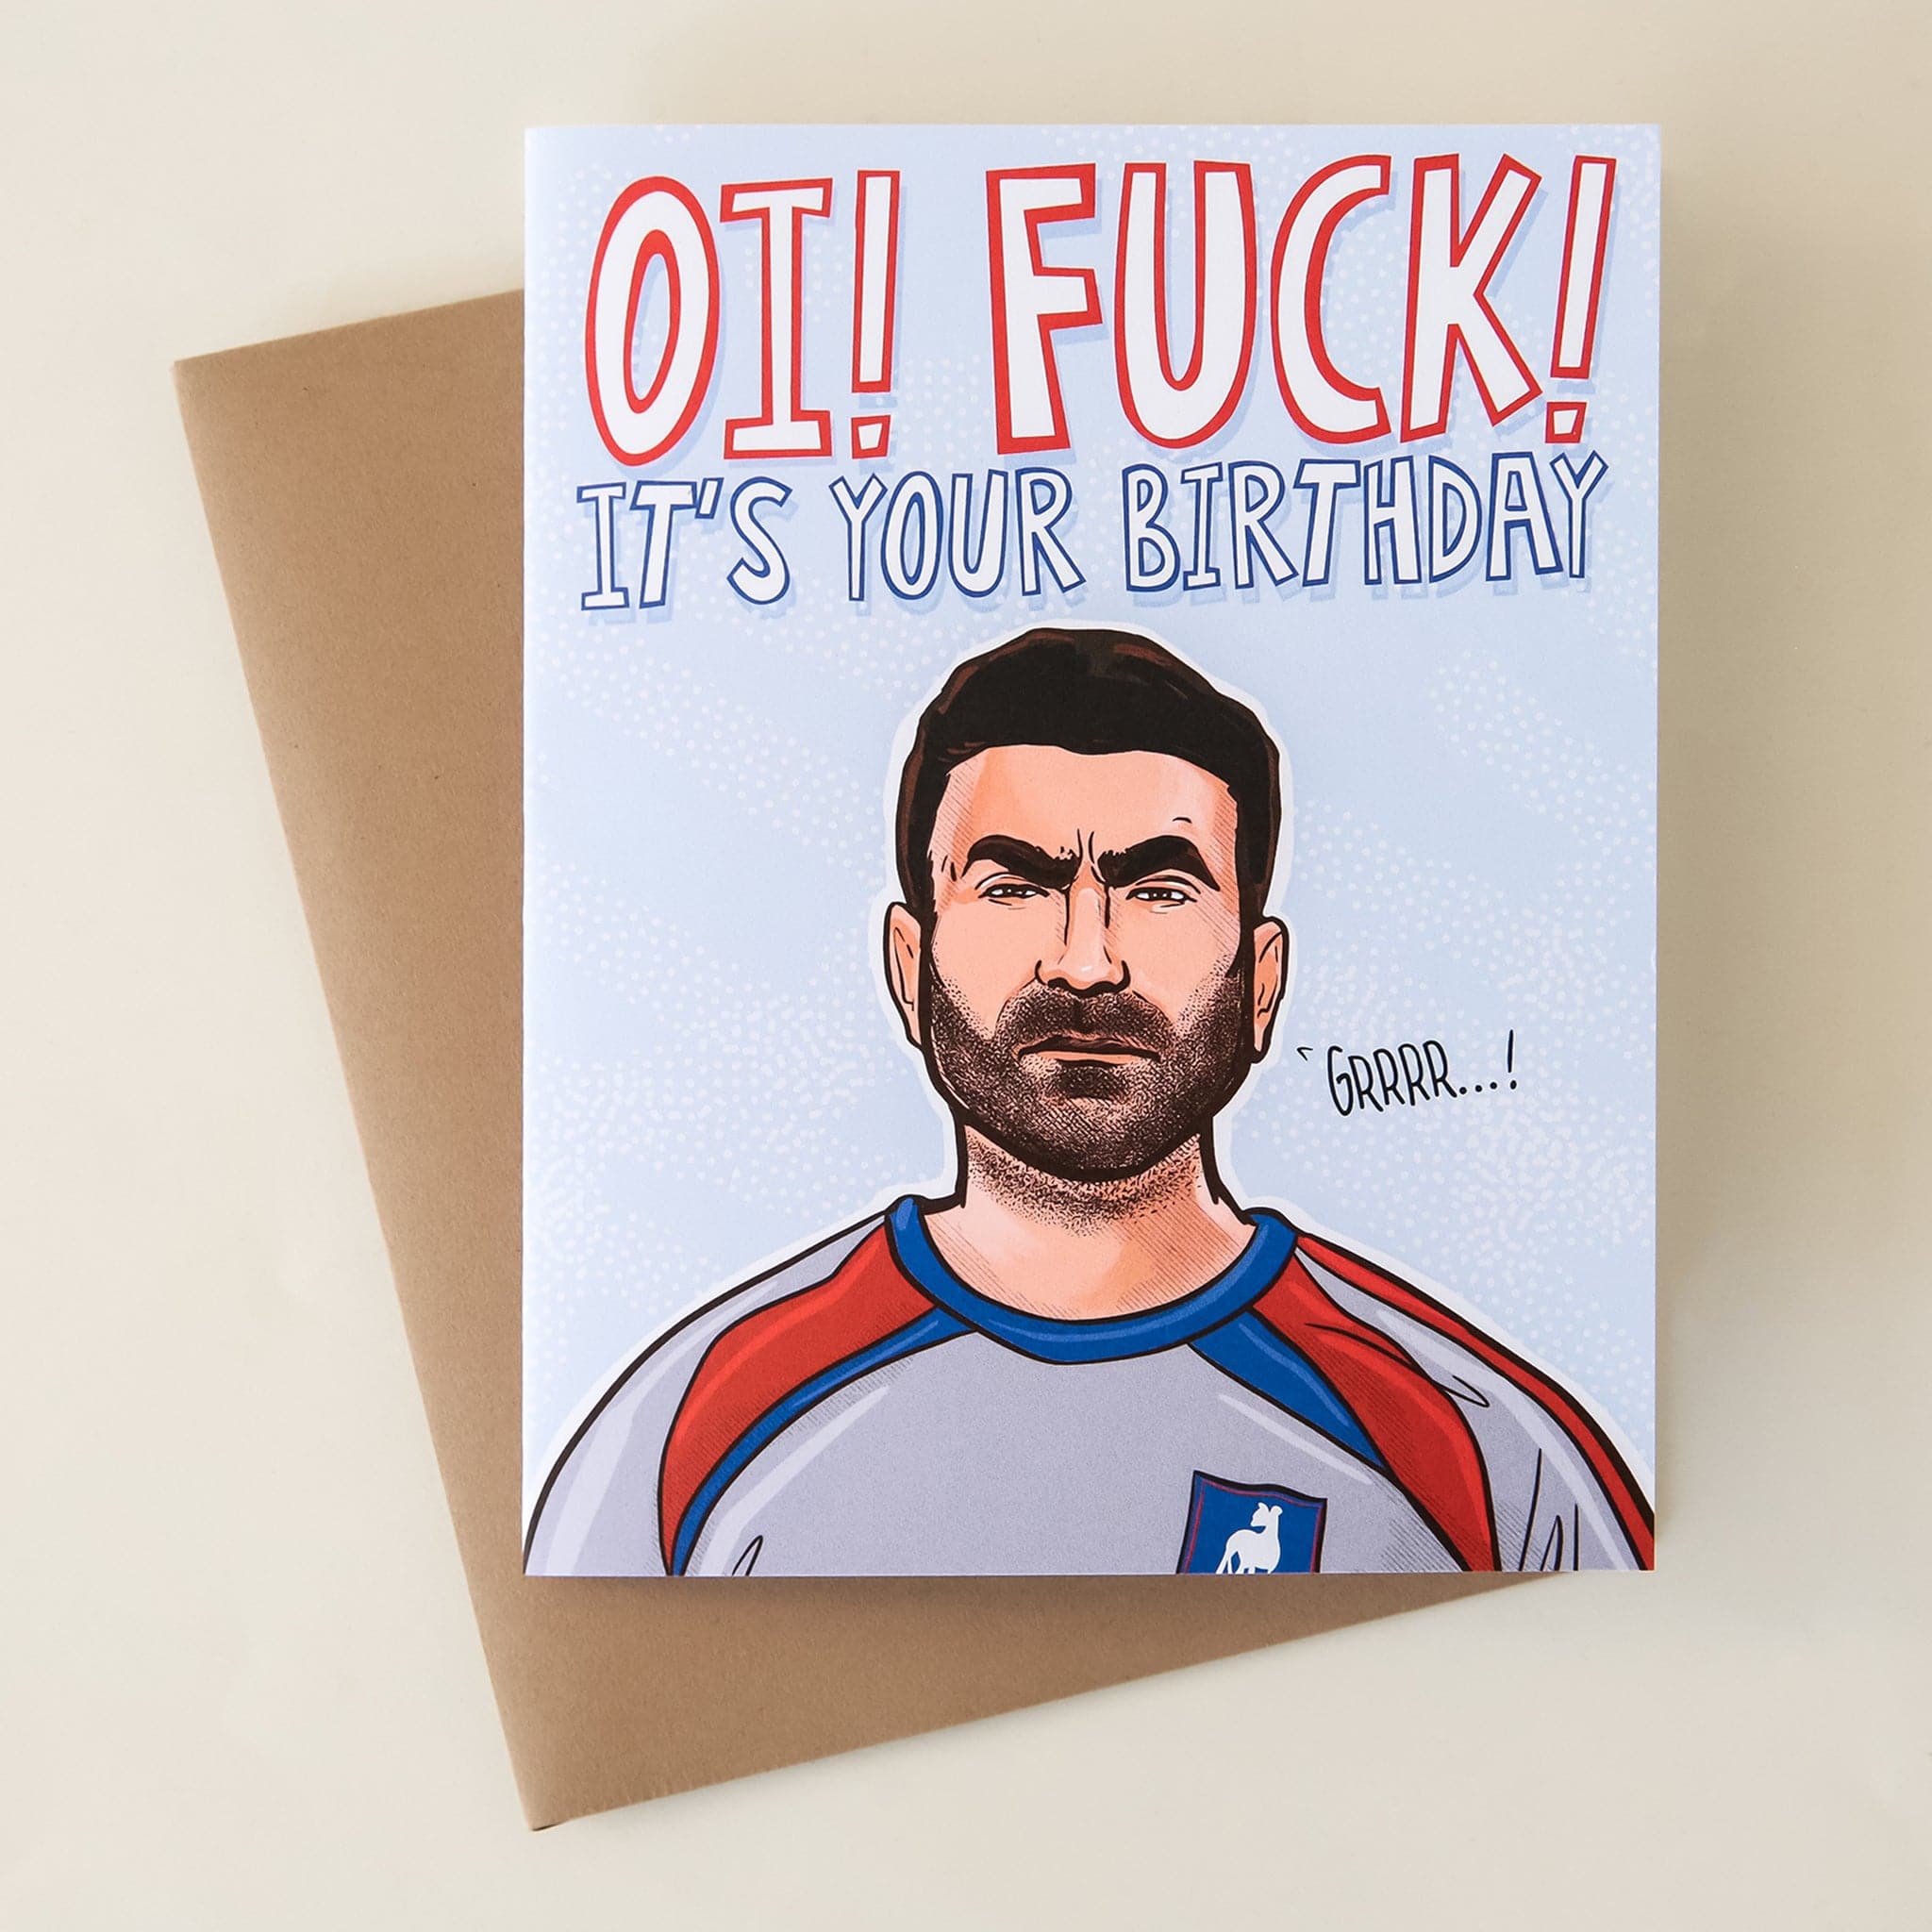 On top of a brown envelope is a light blue card. At top is white text that reads ‘OI! Fuck! It’s your birthday.’ Below is a drawing of the top half of a man wearing a grey, blue and red jersey. He has dark brown hair and brown beard. Next to him is black text that reads ‘grrrr…!&#39;